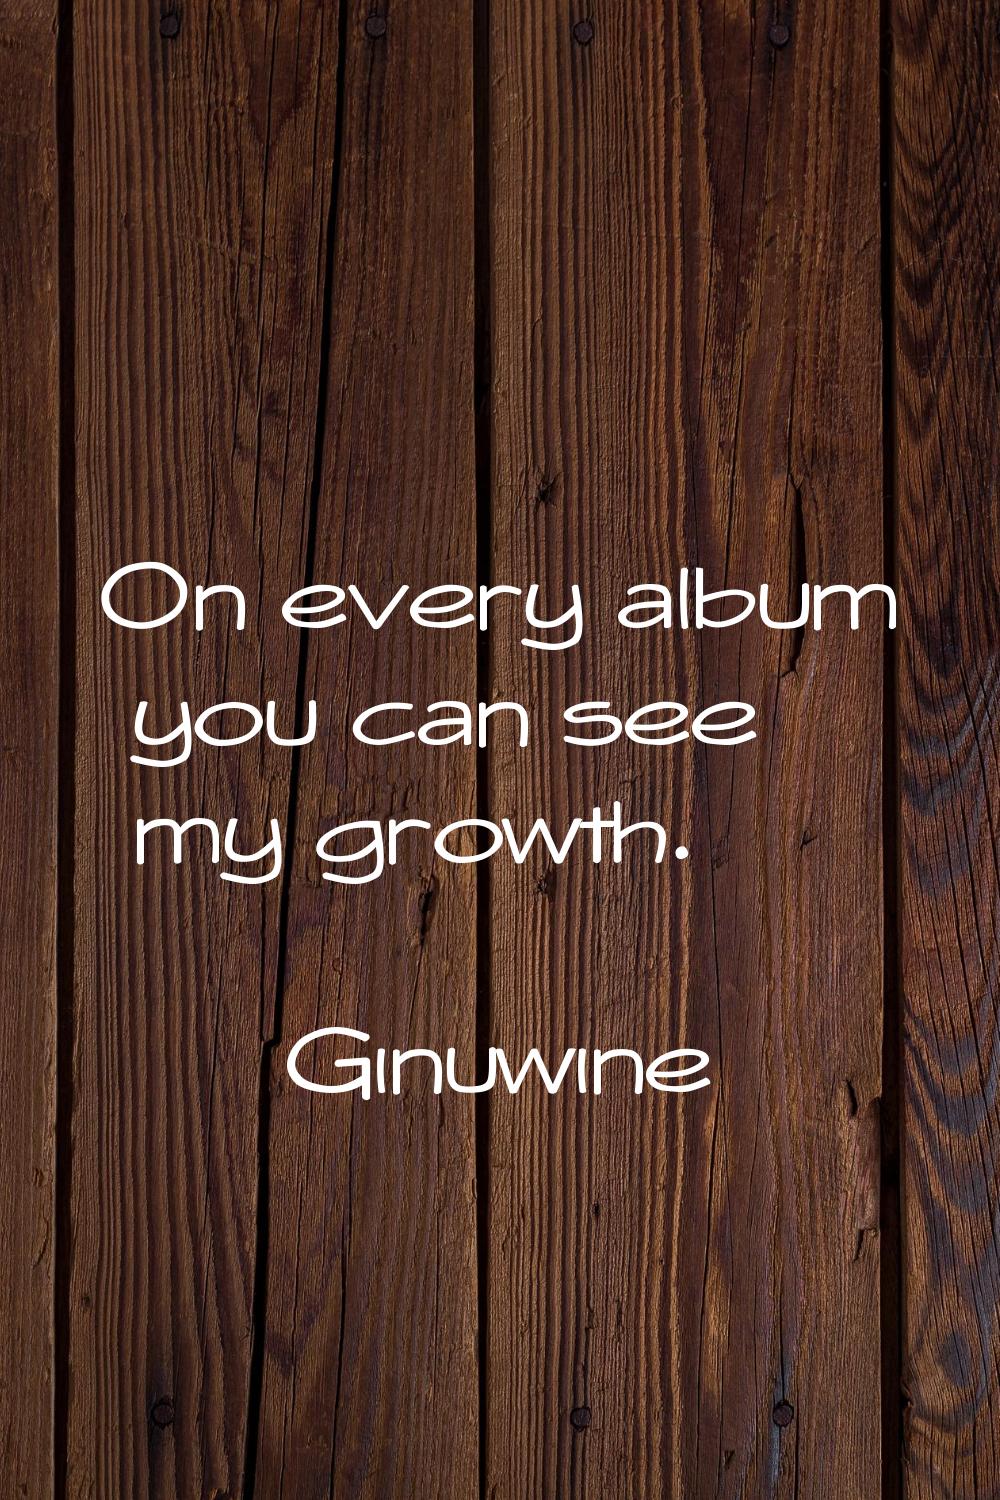 On every album you can see my growth.